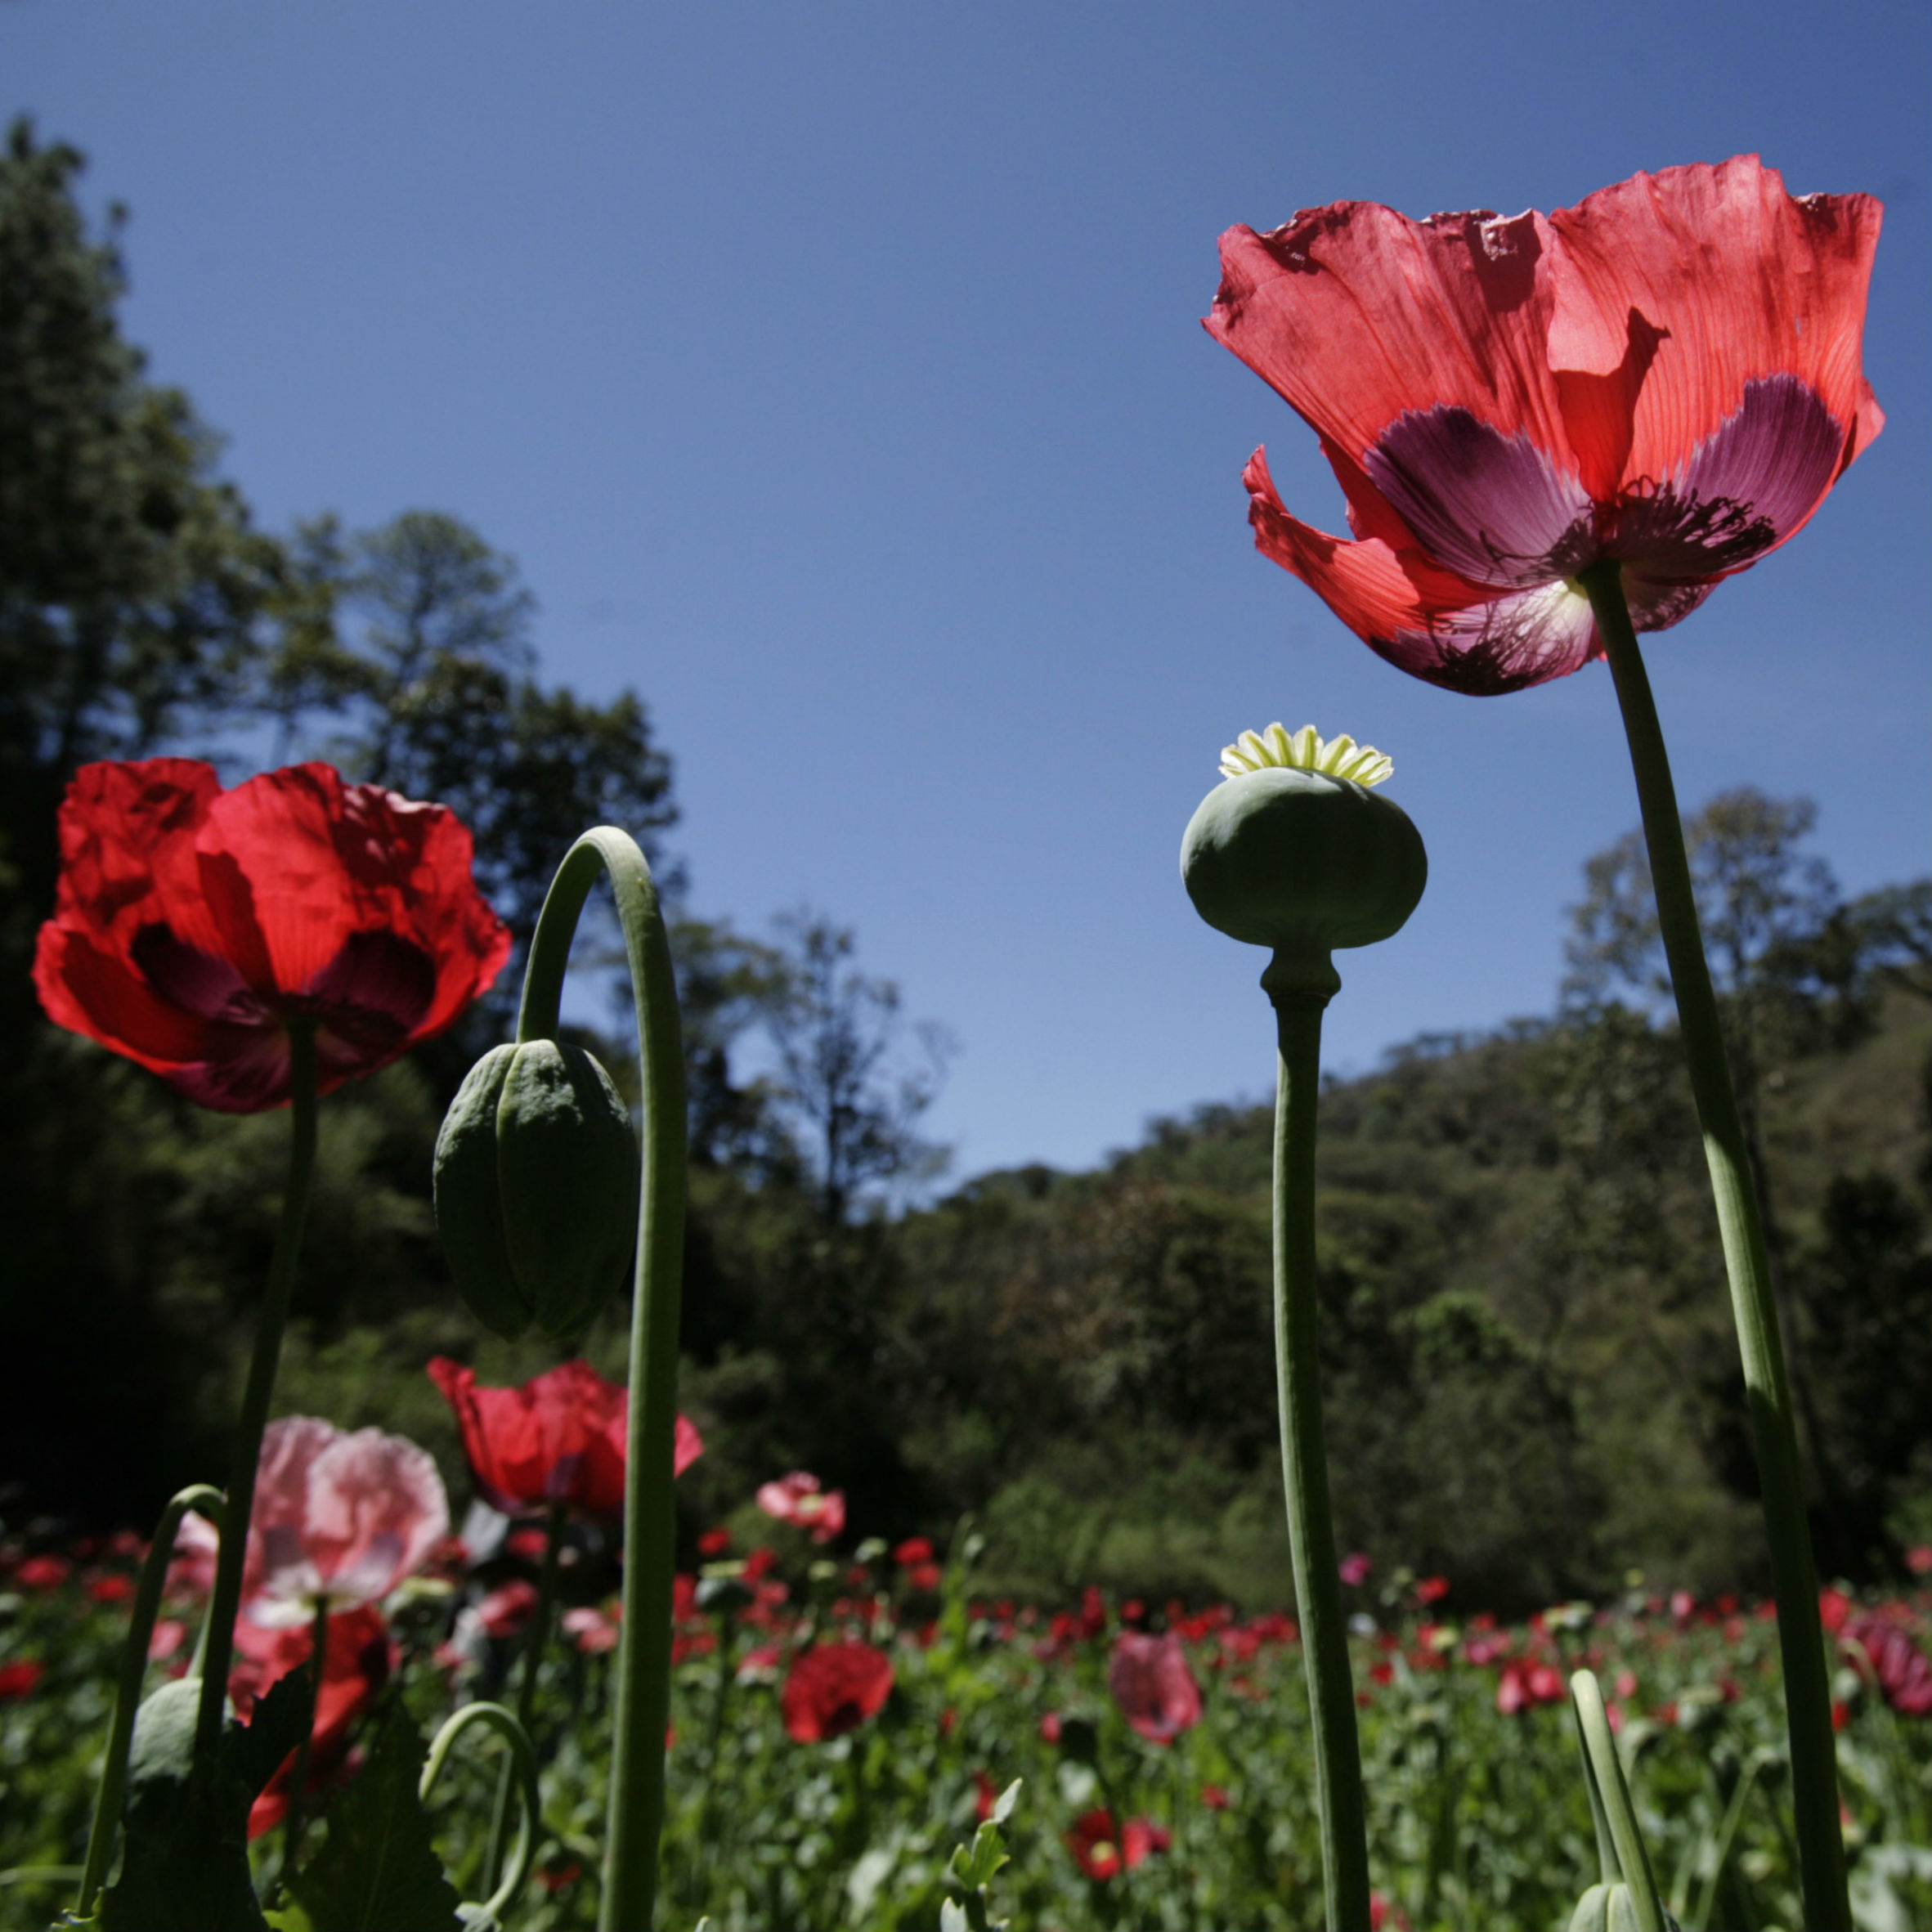 Church must not condemn opium farmers, says Mexican bishop